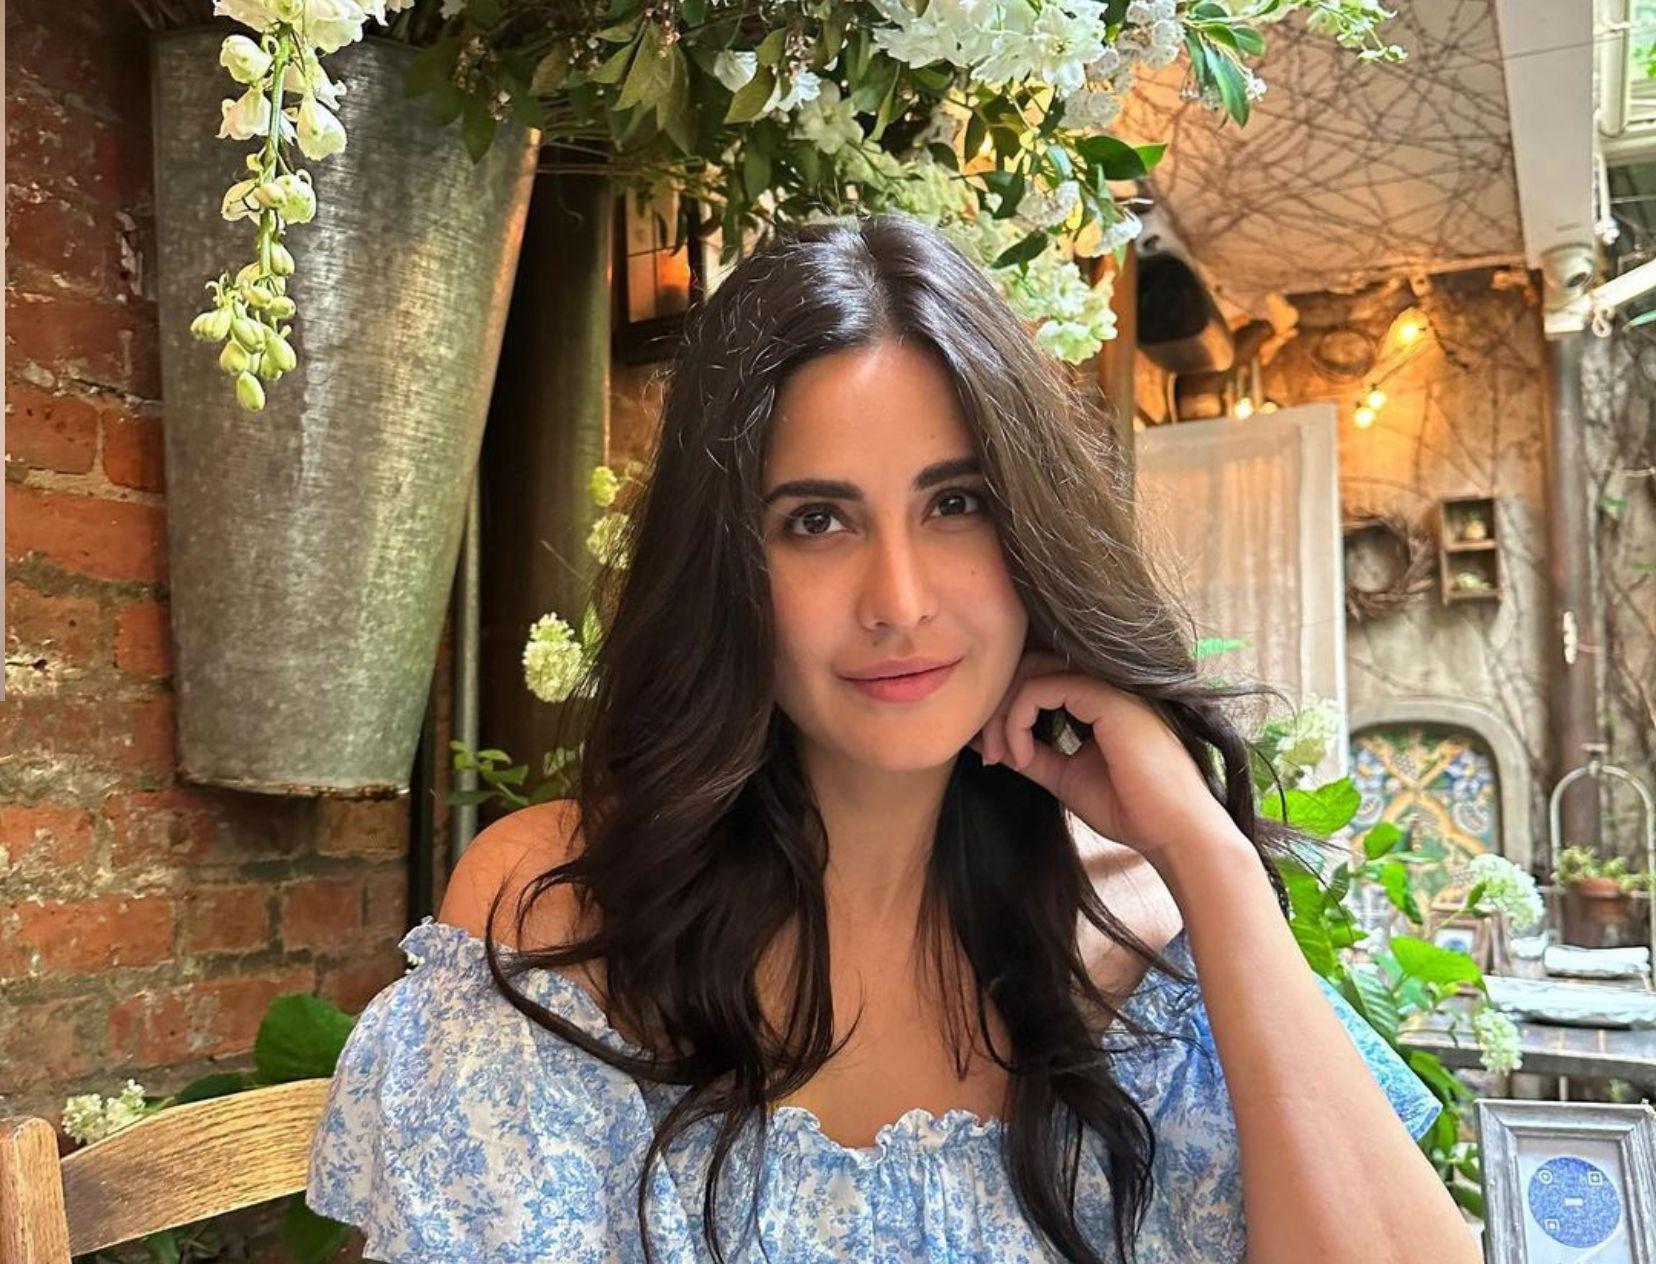 Not Coffee, Katrina Kaif Drinks This Bitter Thing Every Morning